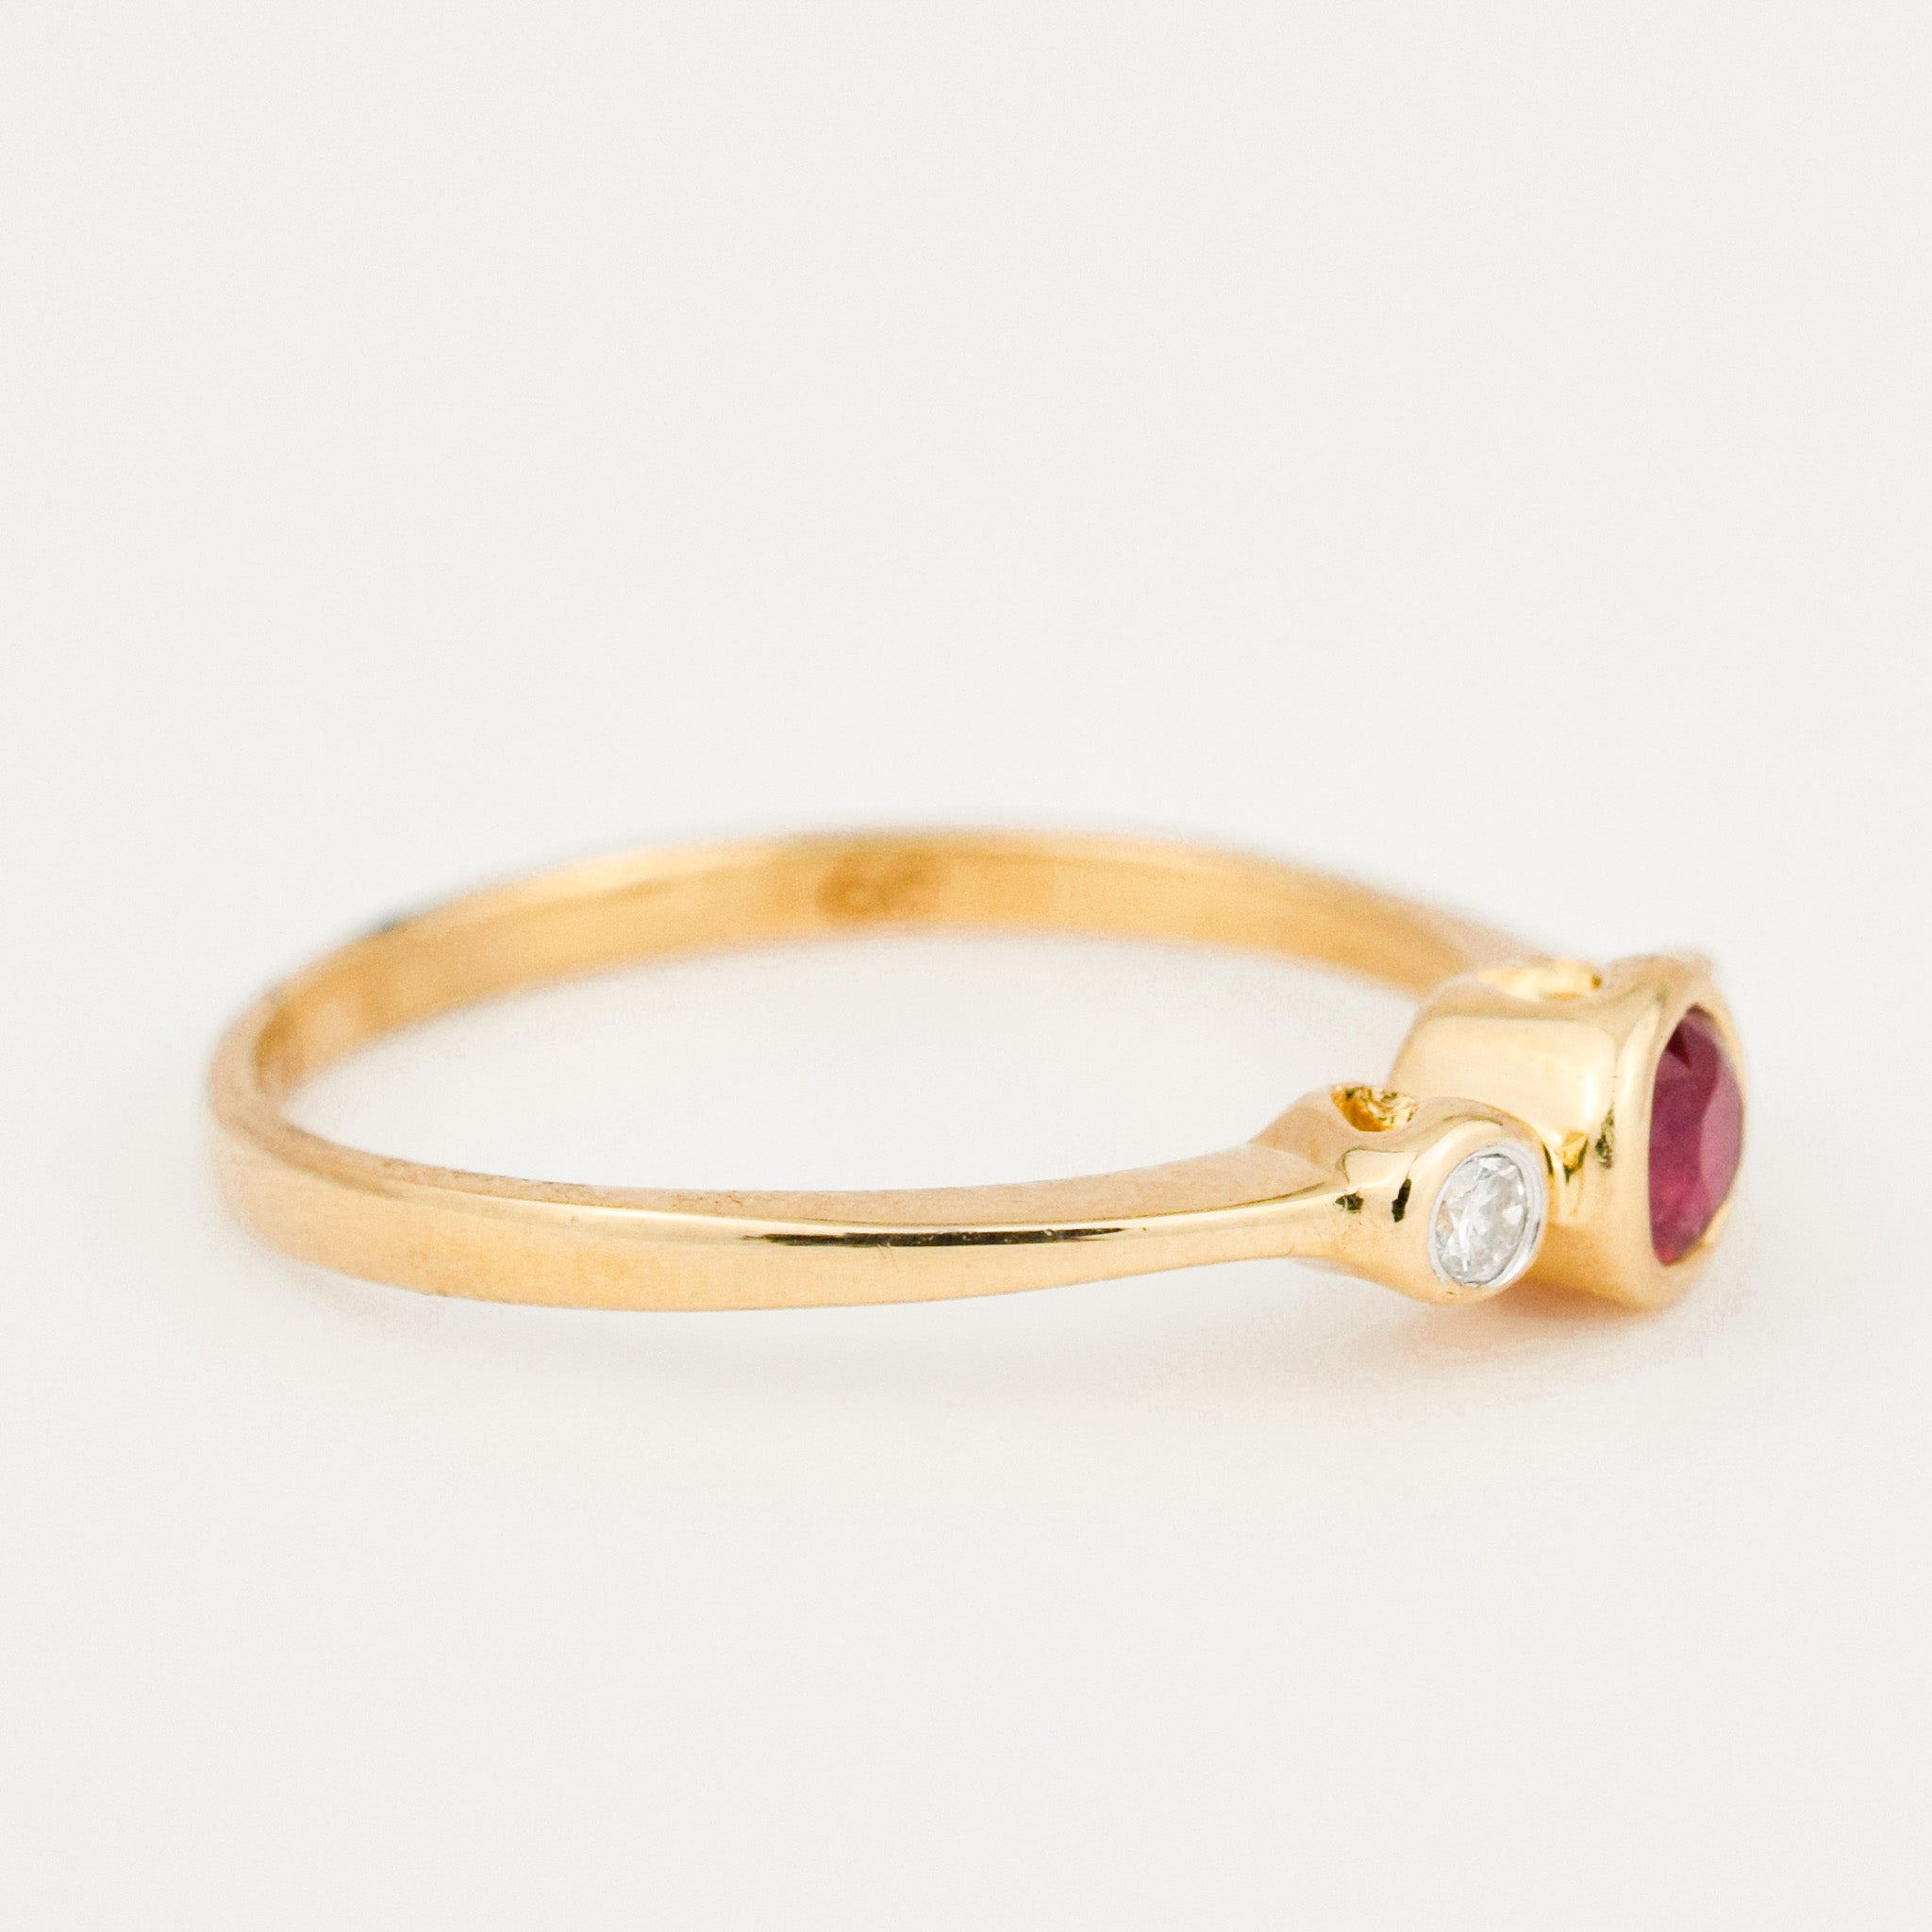 Ruby and Diamond Trilogy Pinkie Ring